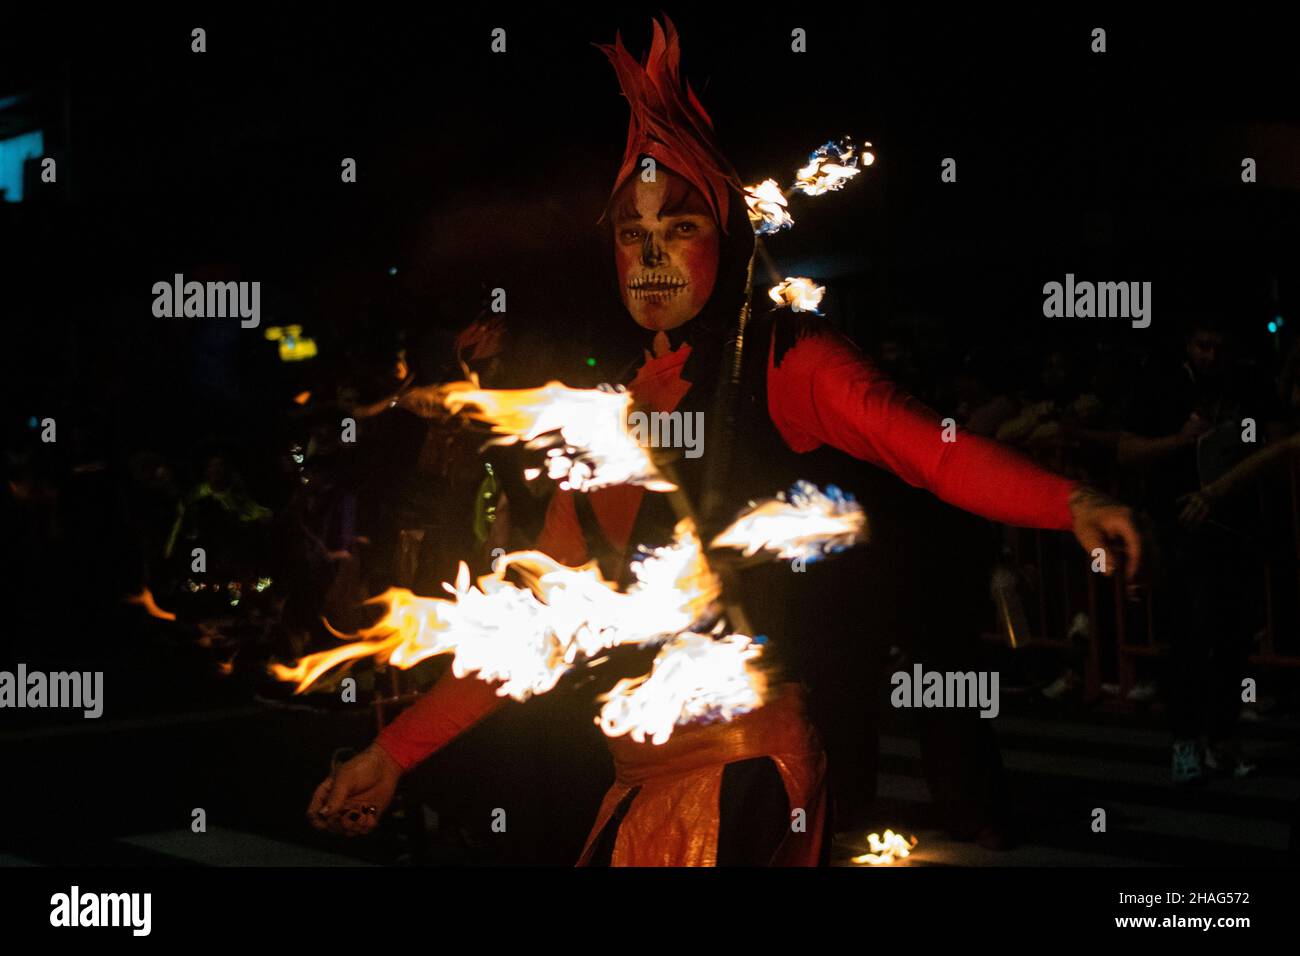 Cultural groups from across Medellin take over the streets for a festive Carnival representing Colombia's myths and legends that opens the Christmas season and Festivities in the City, in Medellin, Colombia on December 8, 2021. Stock Photo